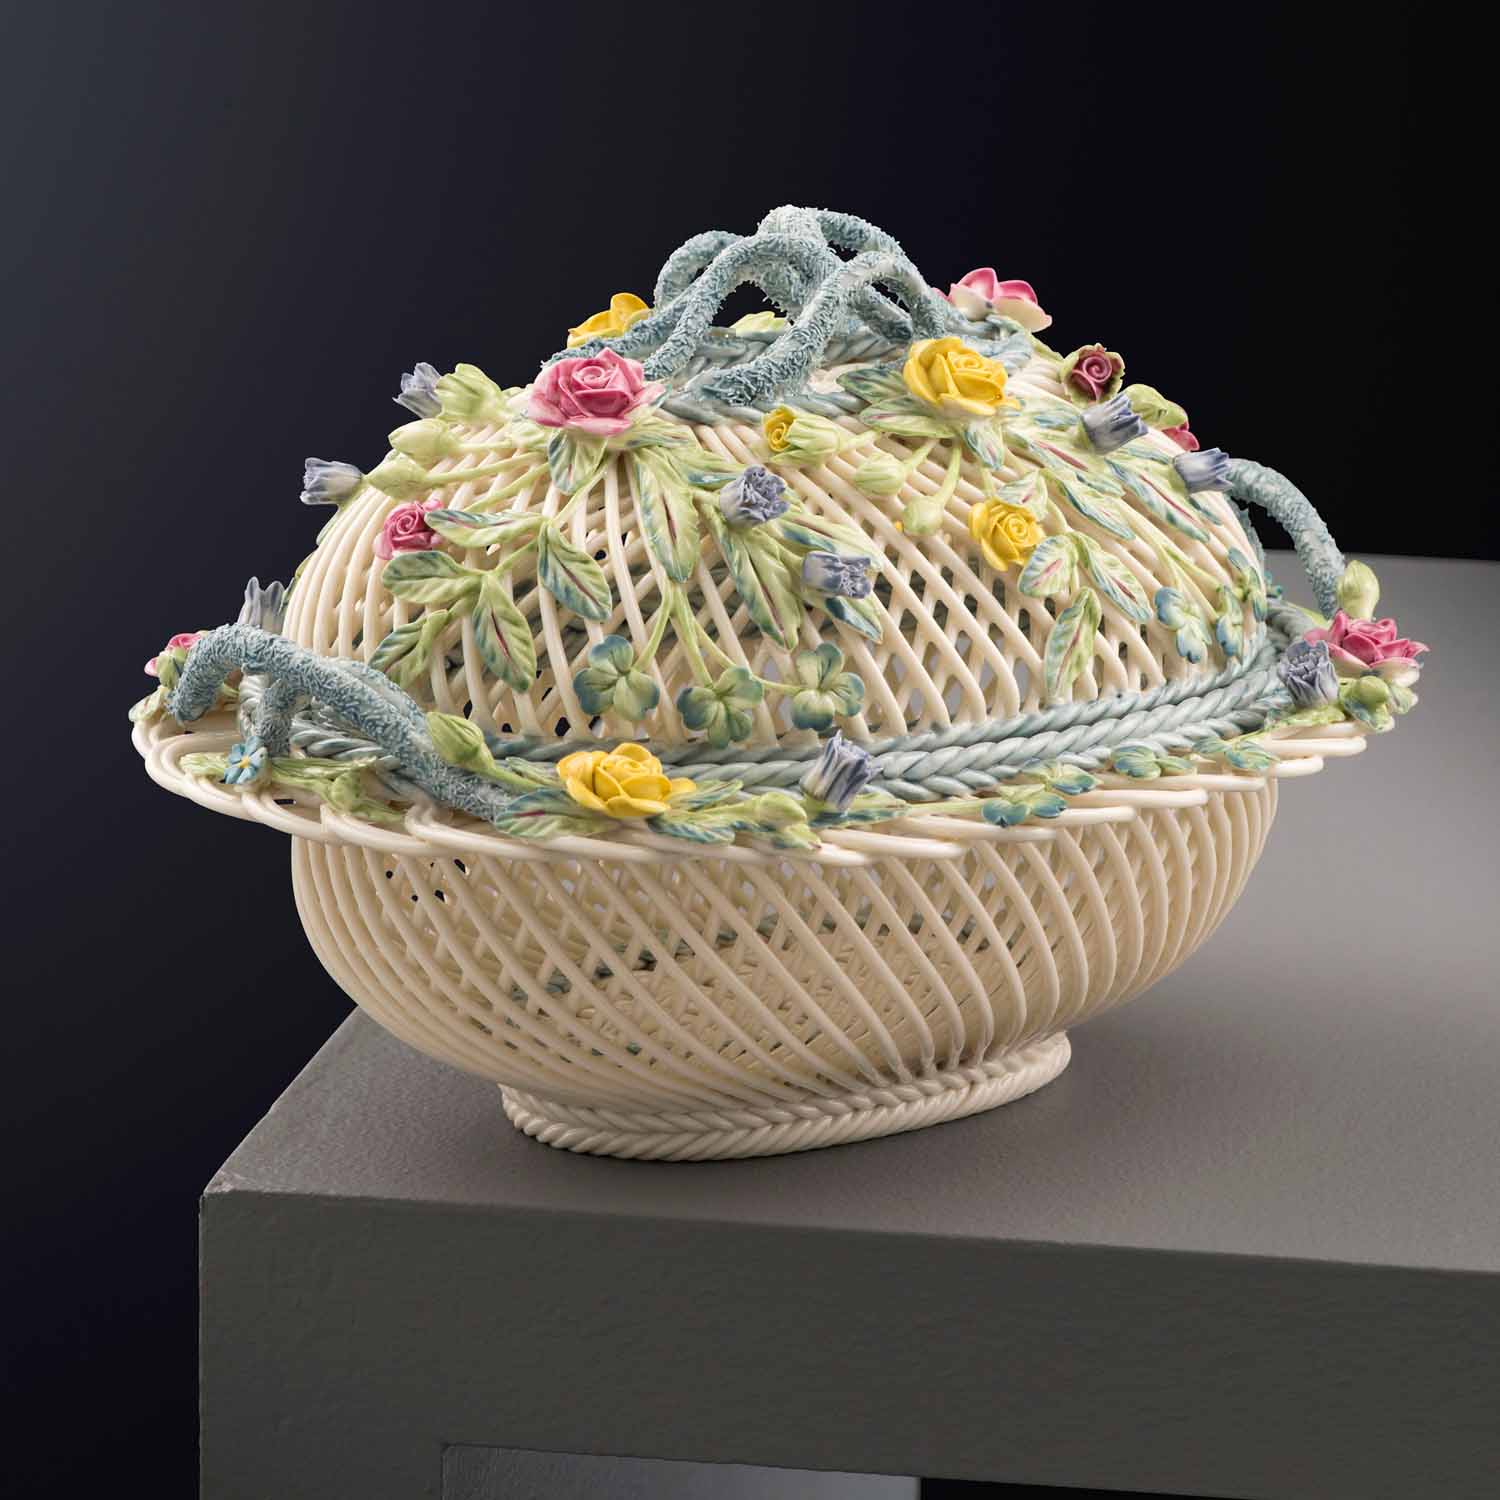 Product image for Belleek Pottery | Masterpiece Collection Oval Covered Basket